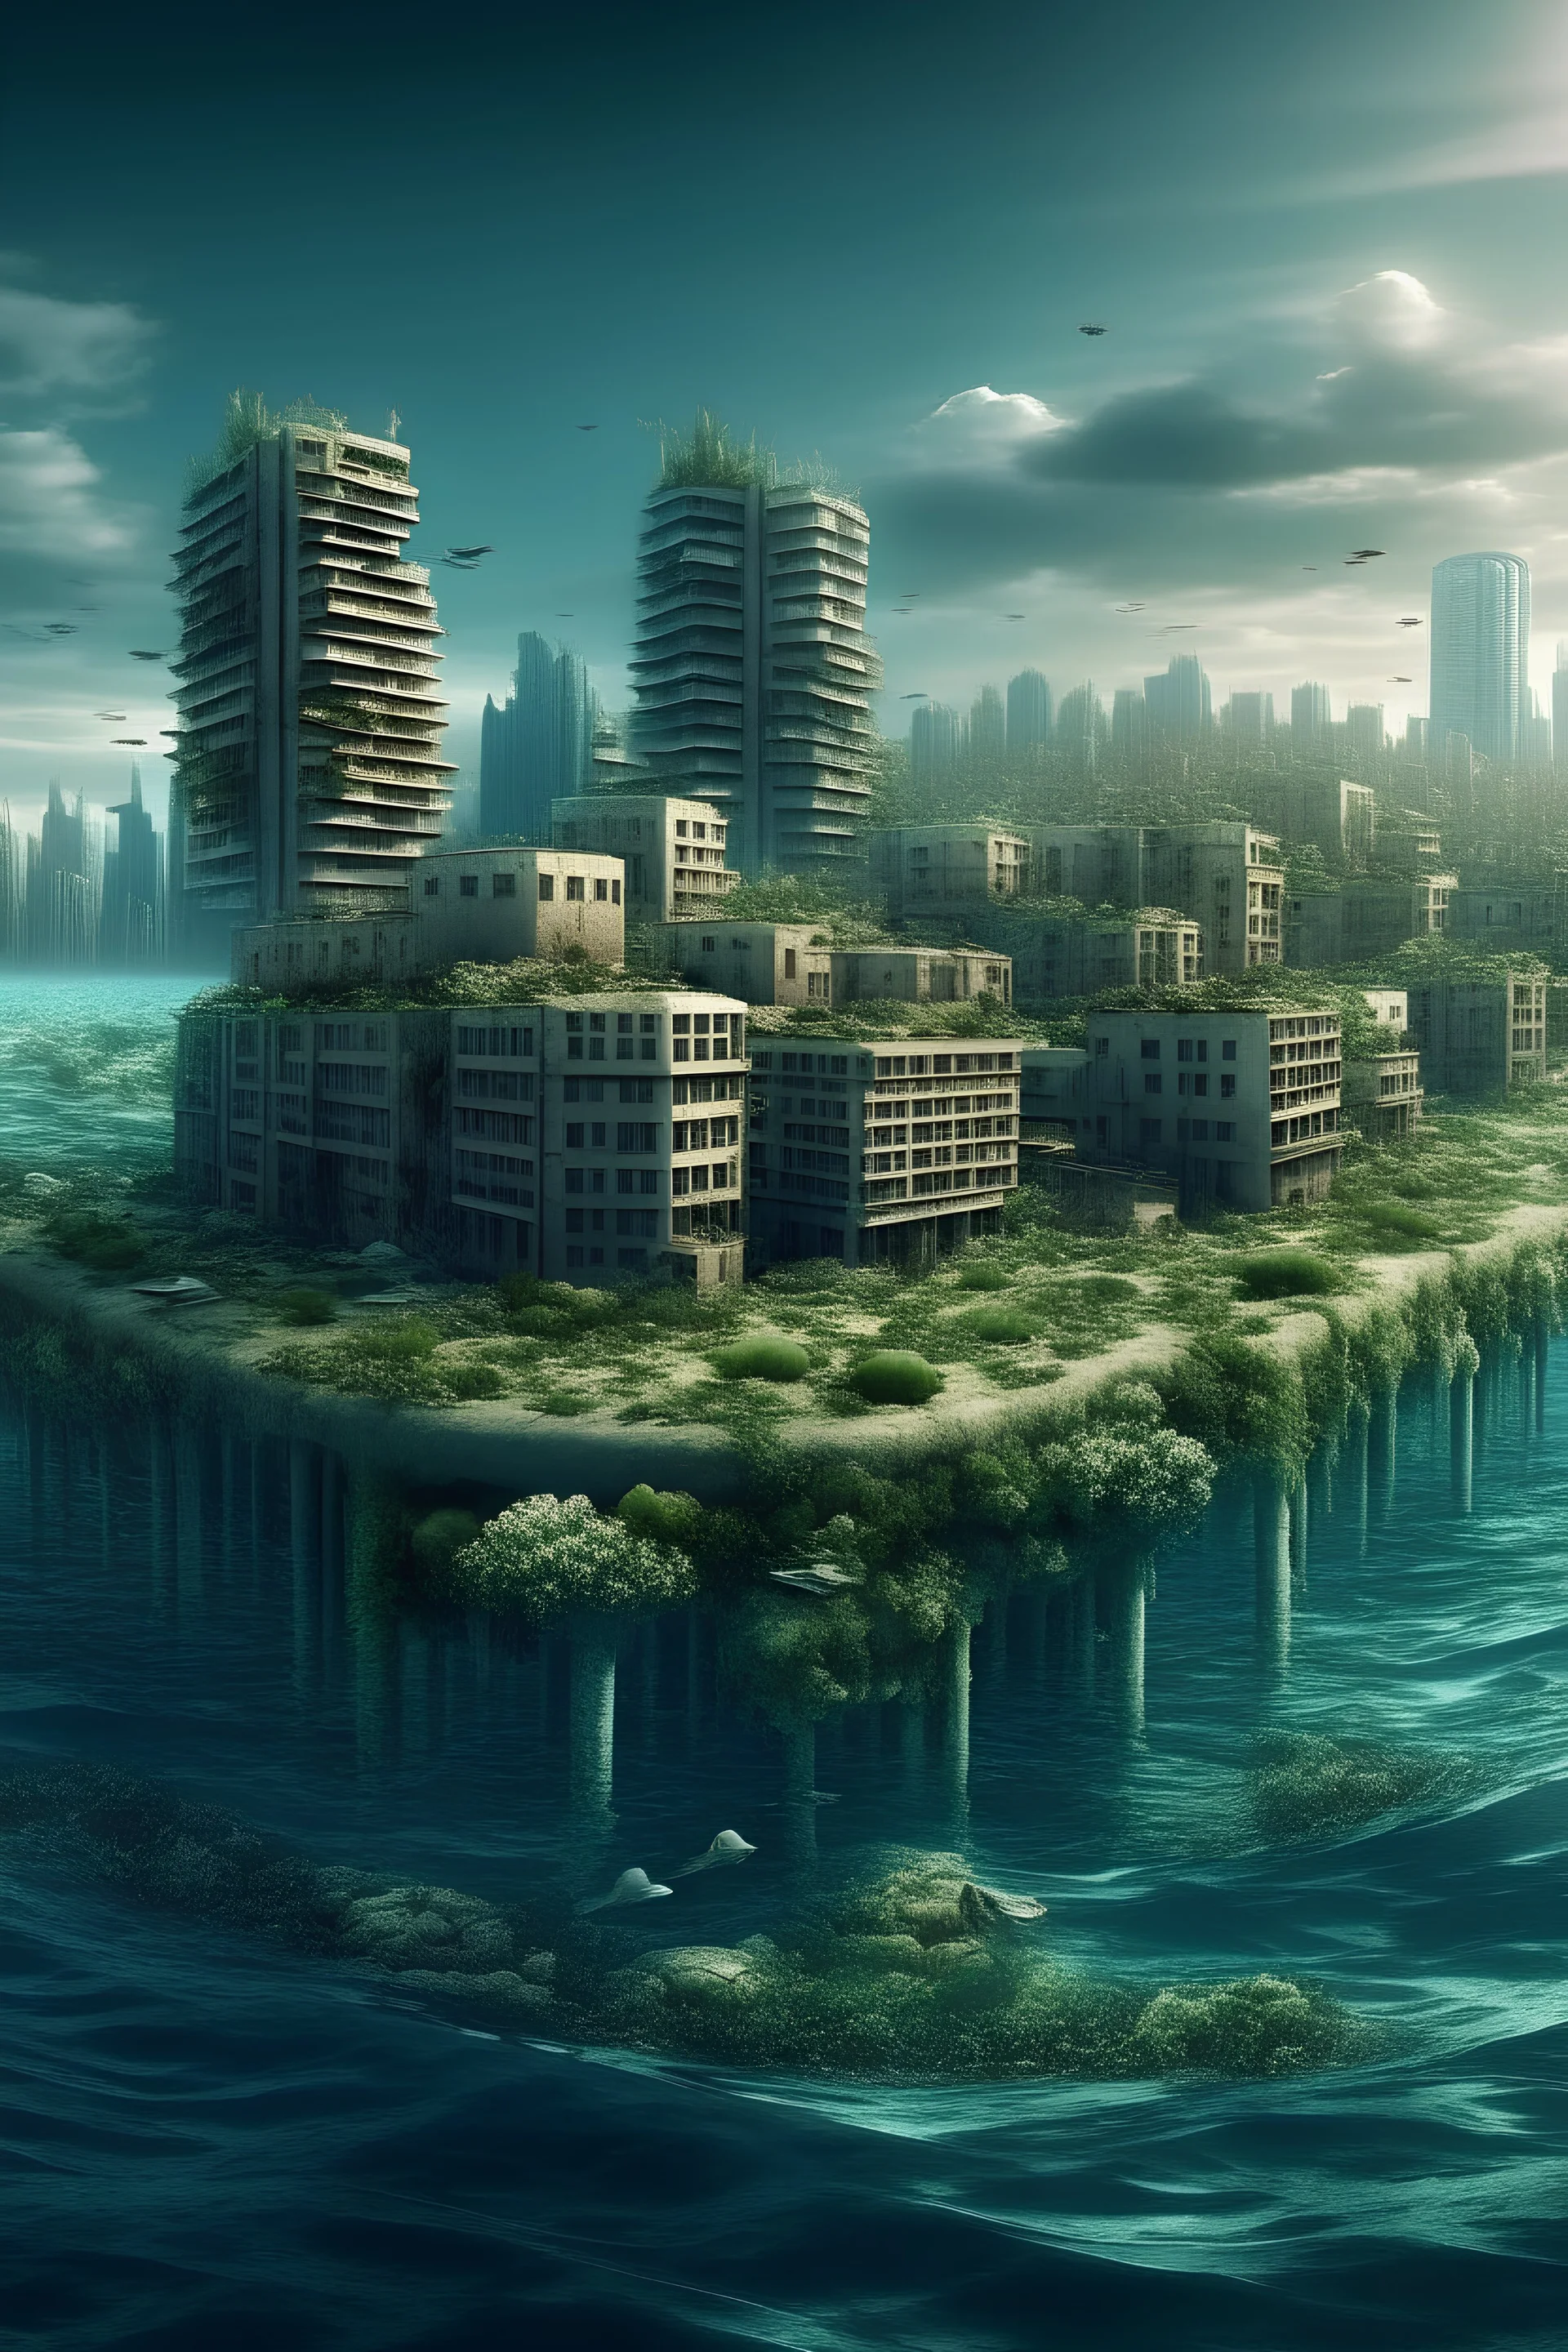 City built on the surface of the sea